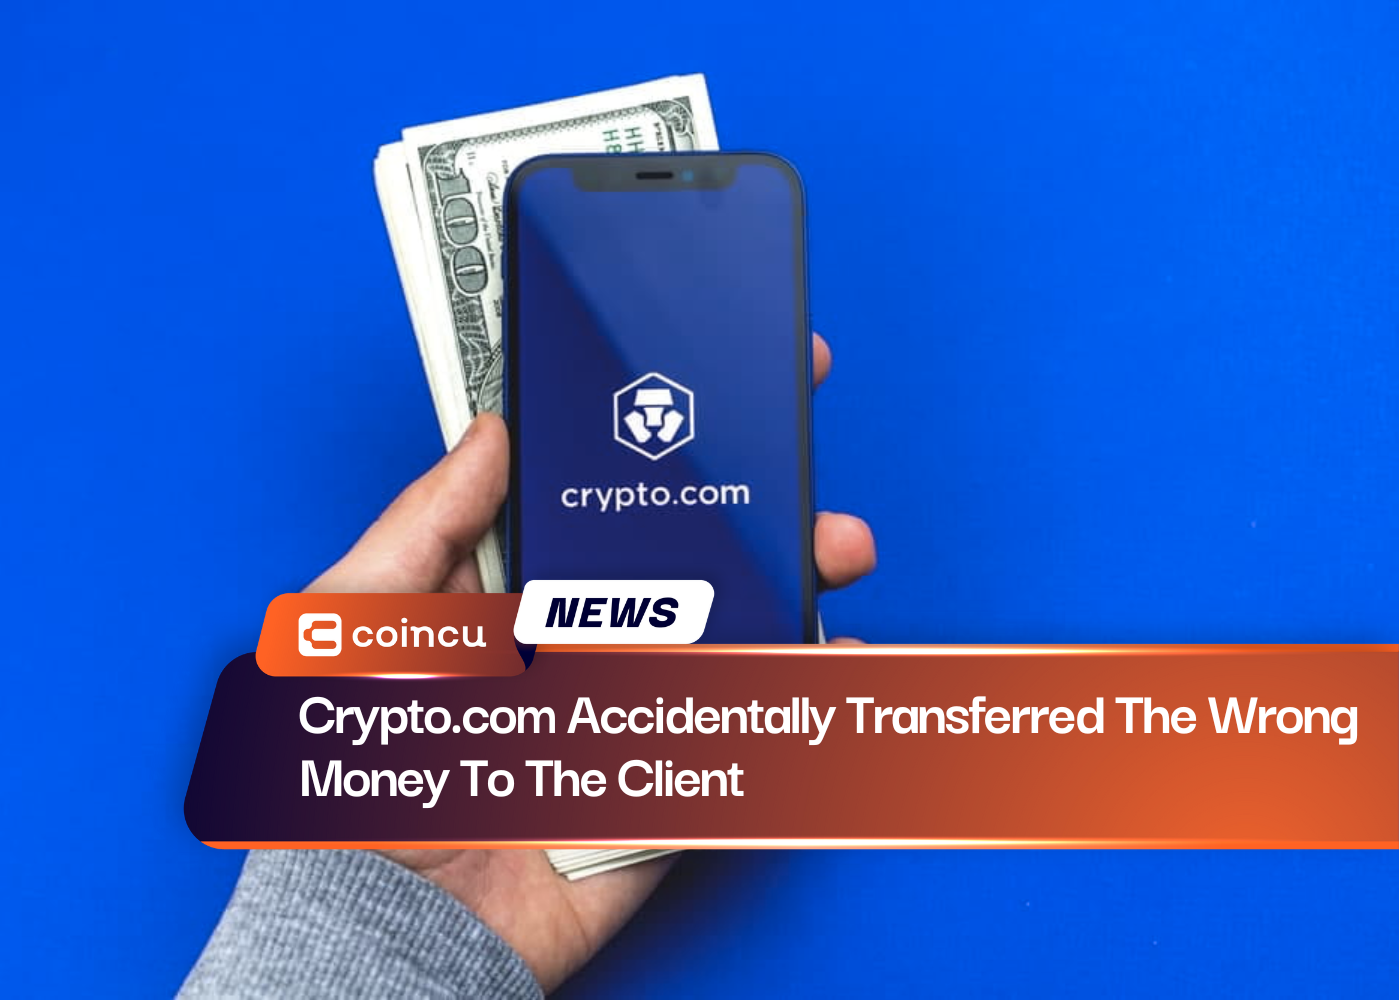 Crypto.com Accidentally Transferred The Wrong Money To The Client